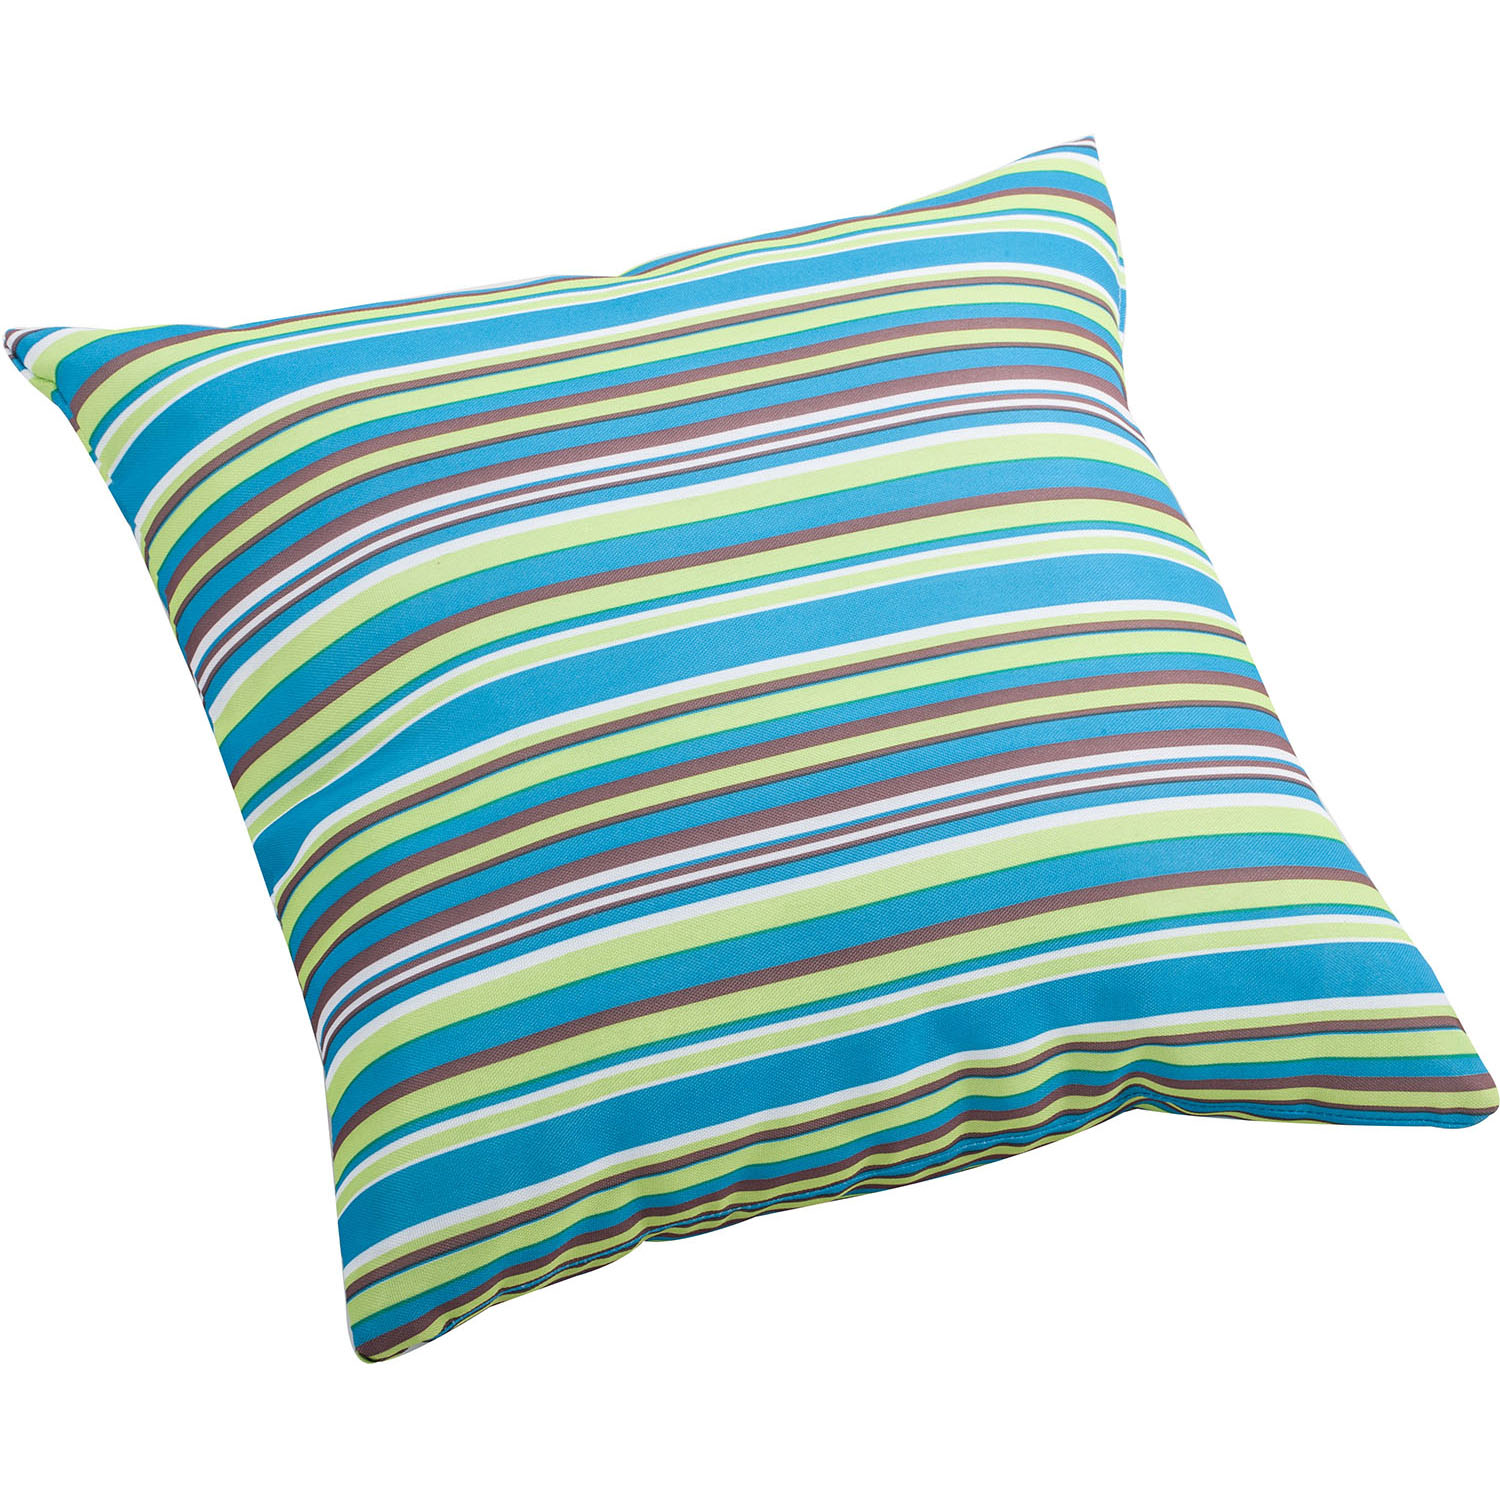 Outdoor Puppy Pillow With Multicolor Stripe Pattern: Size Options